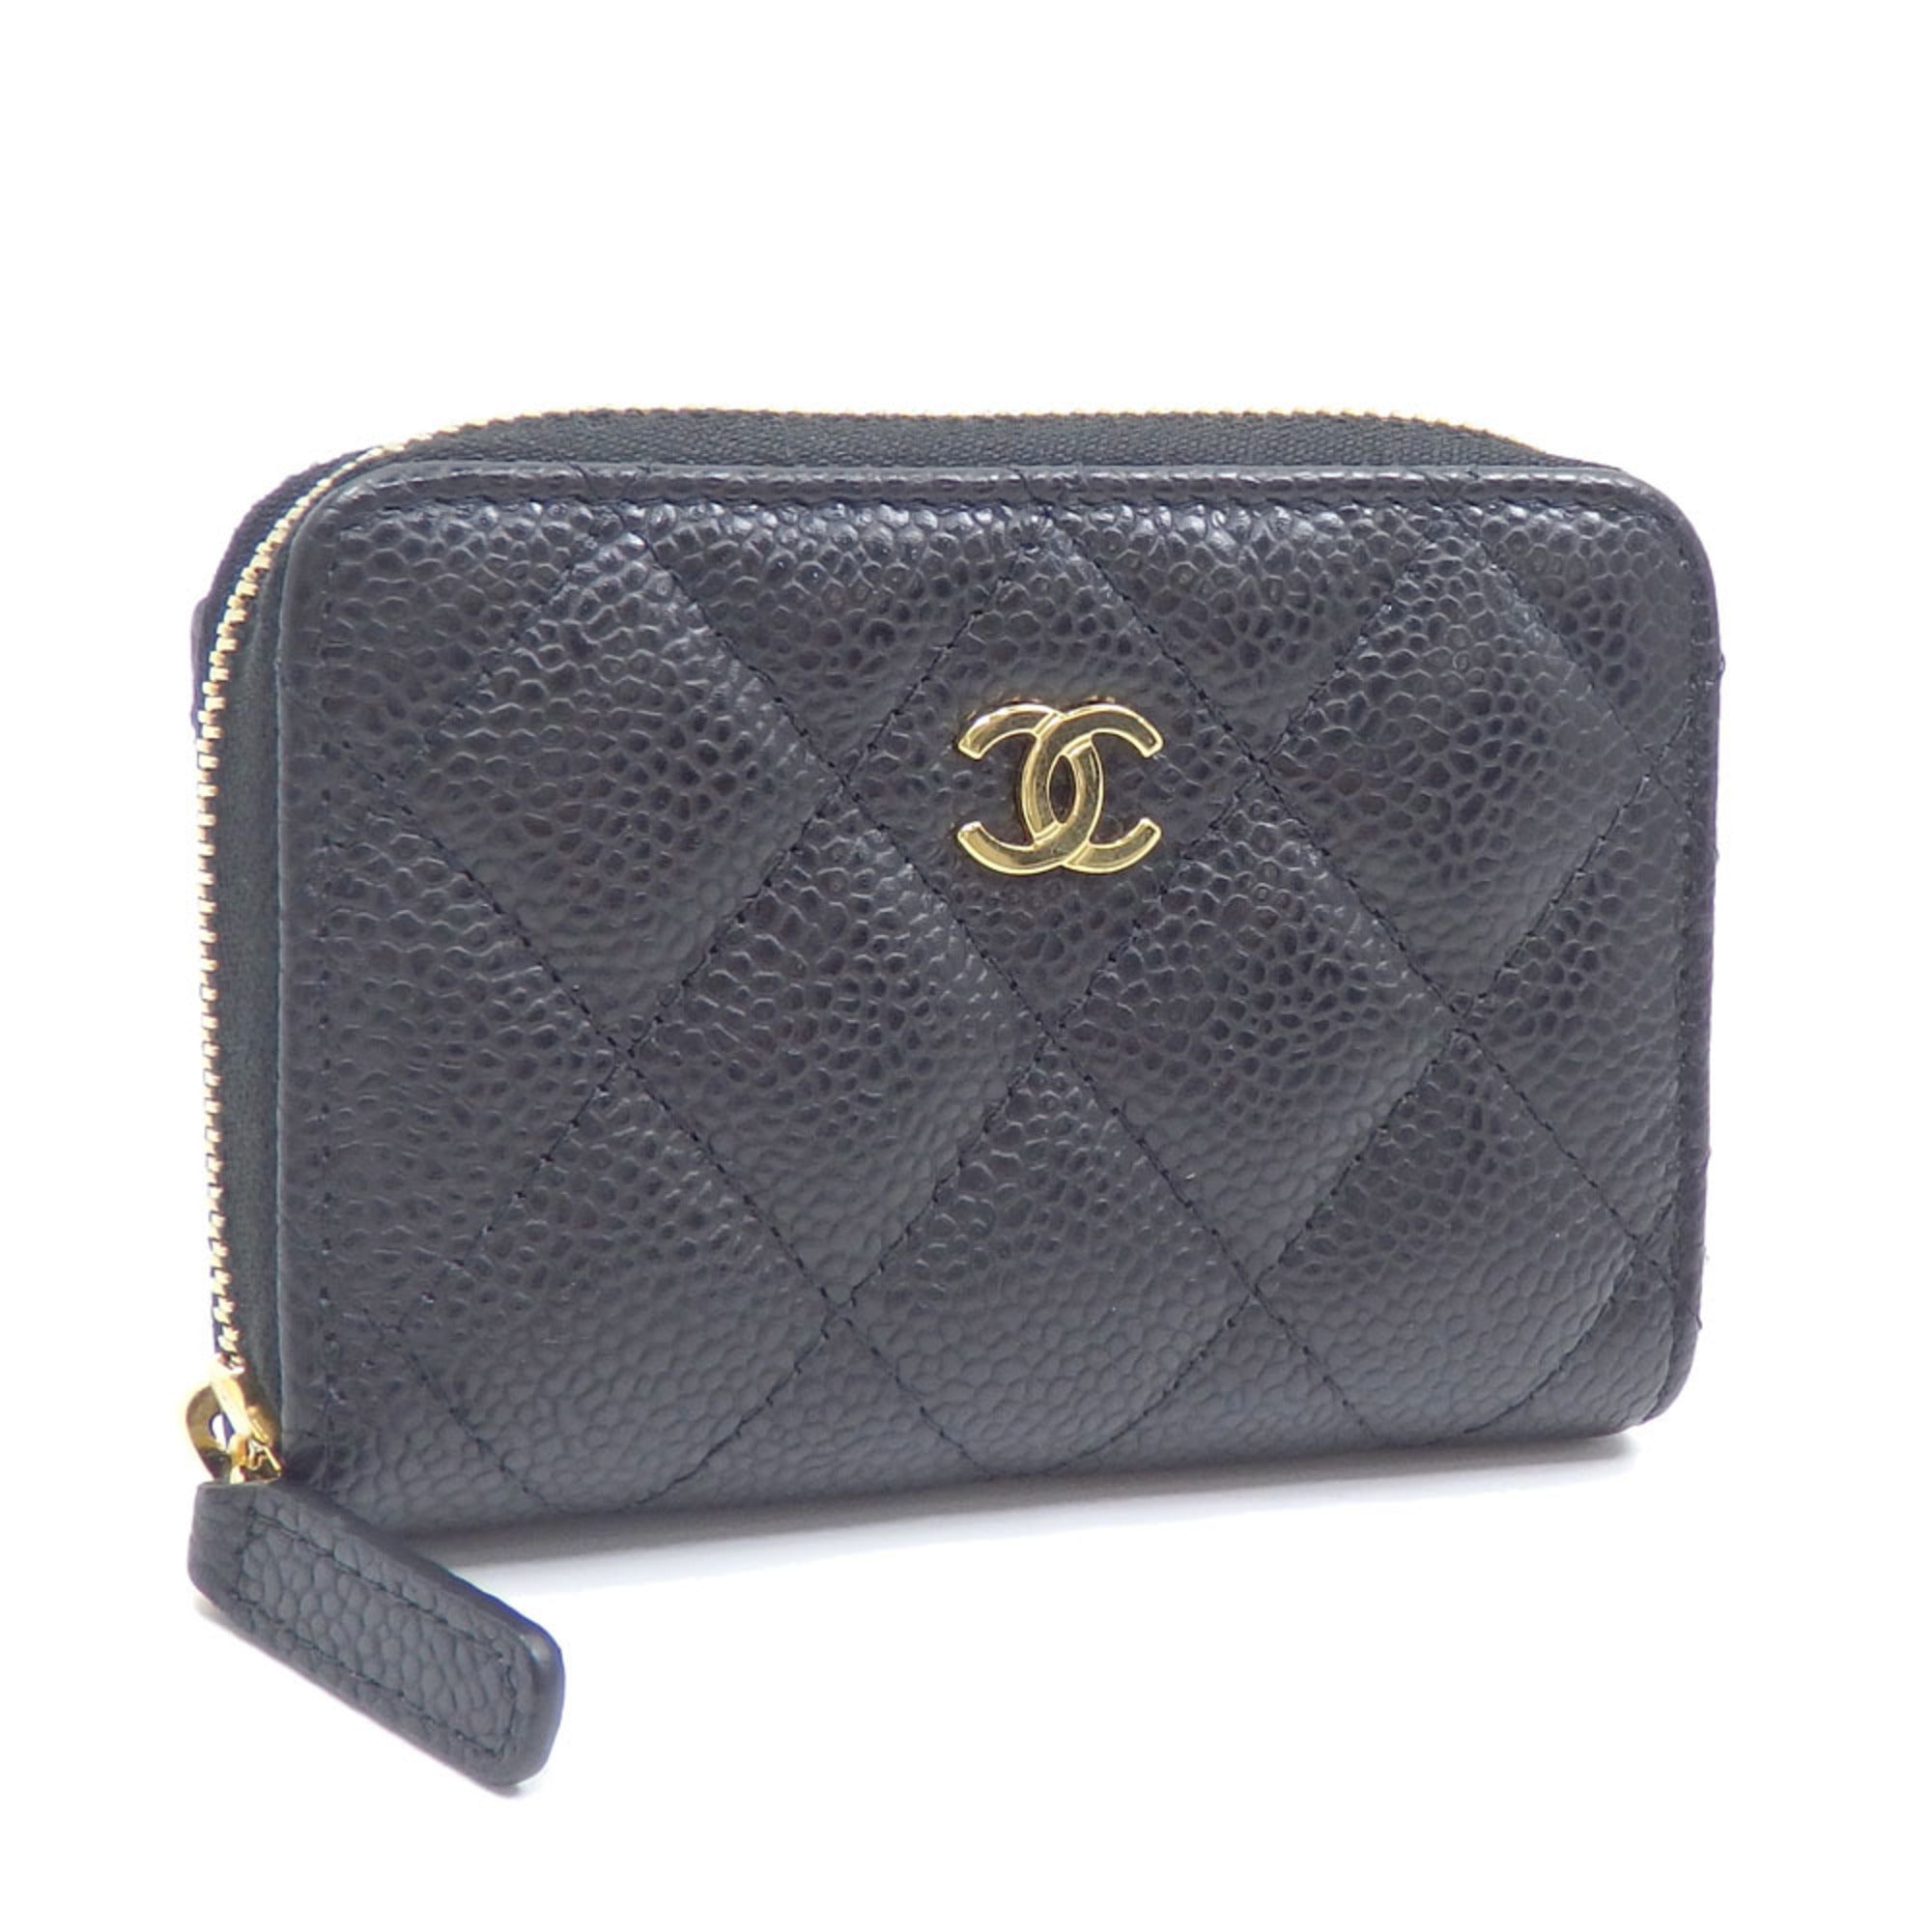 SASOM | bags Chanel CC Coin Purse In Lambskin With Gold Hardware Black  Check the latest price now!